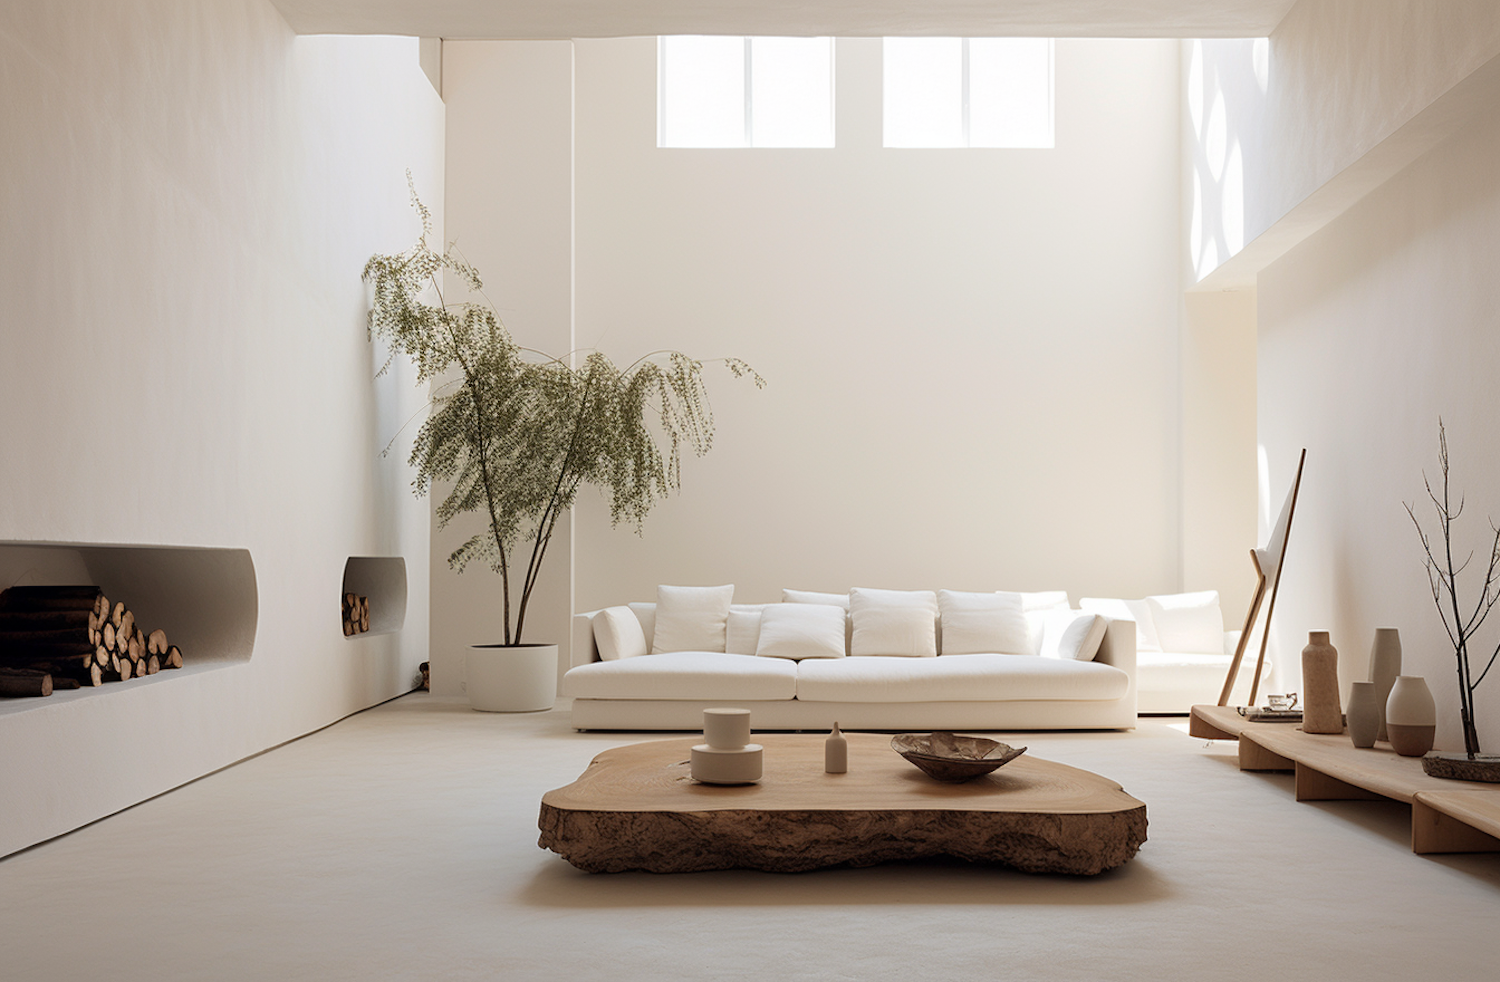 Modern Minimalist Serenity with Natural Accents